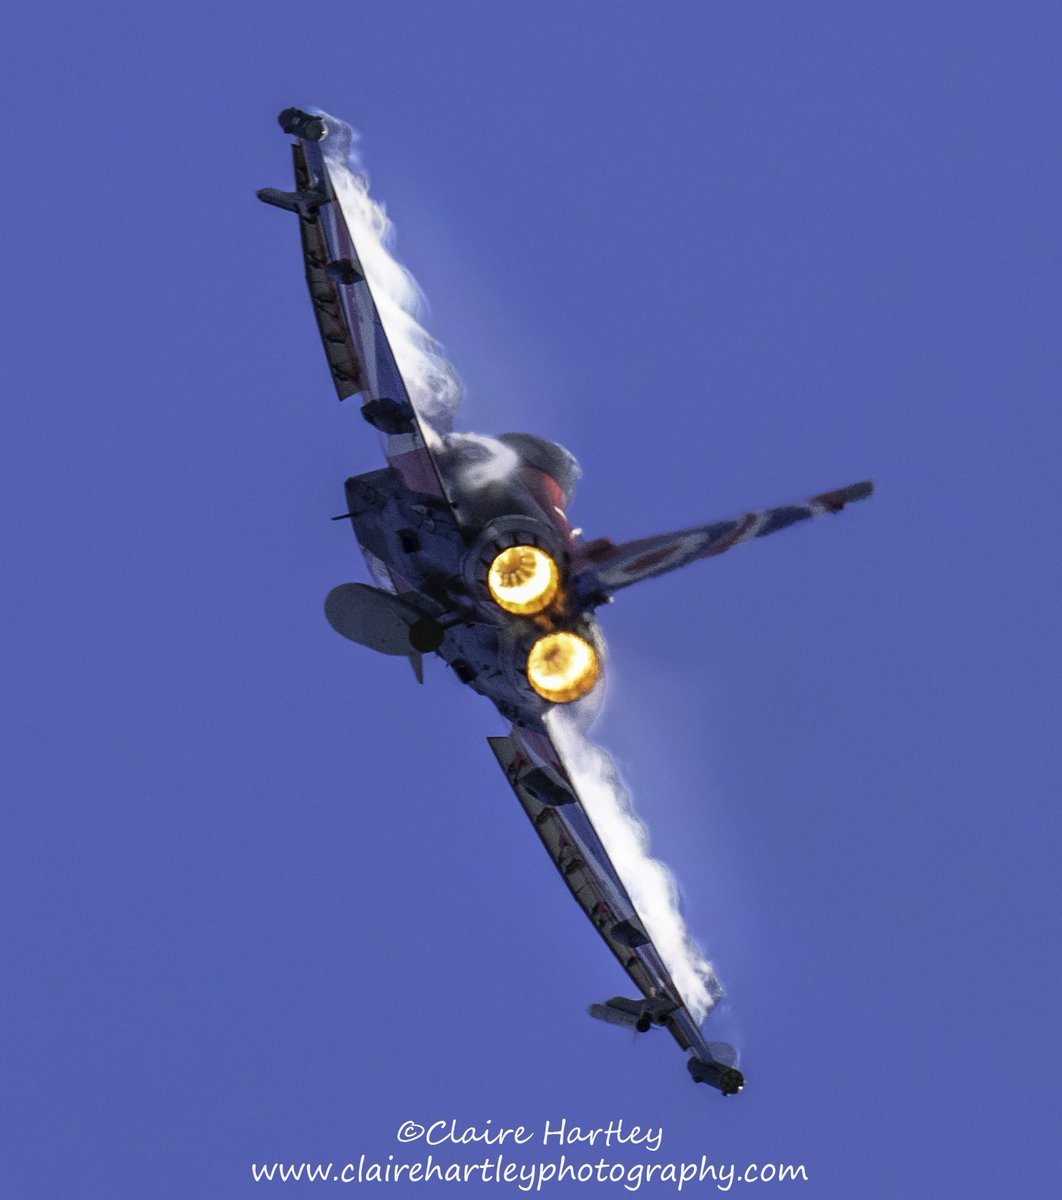 Typhoon display over Coningsby this morning…coming together nicely!